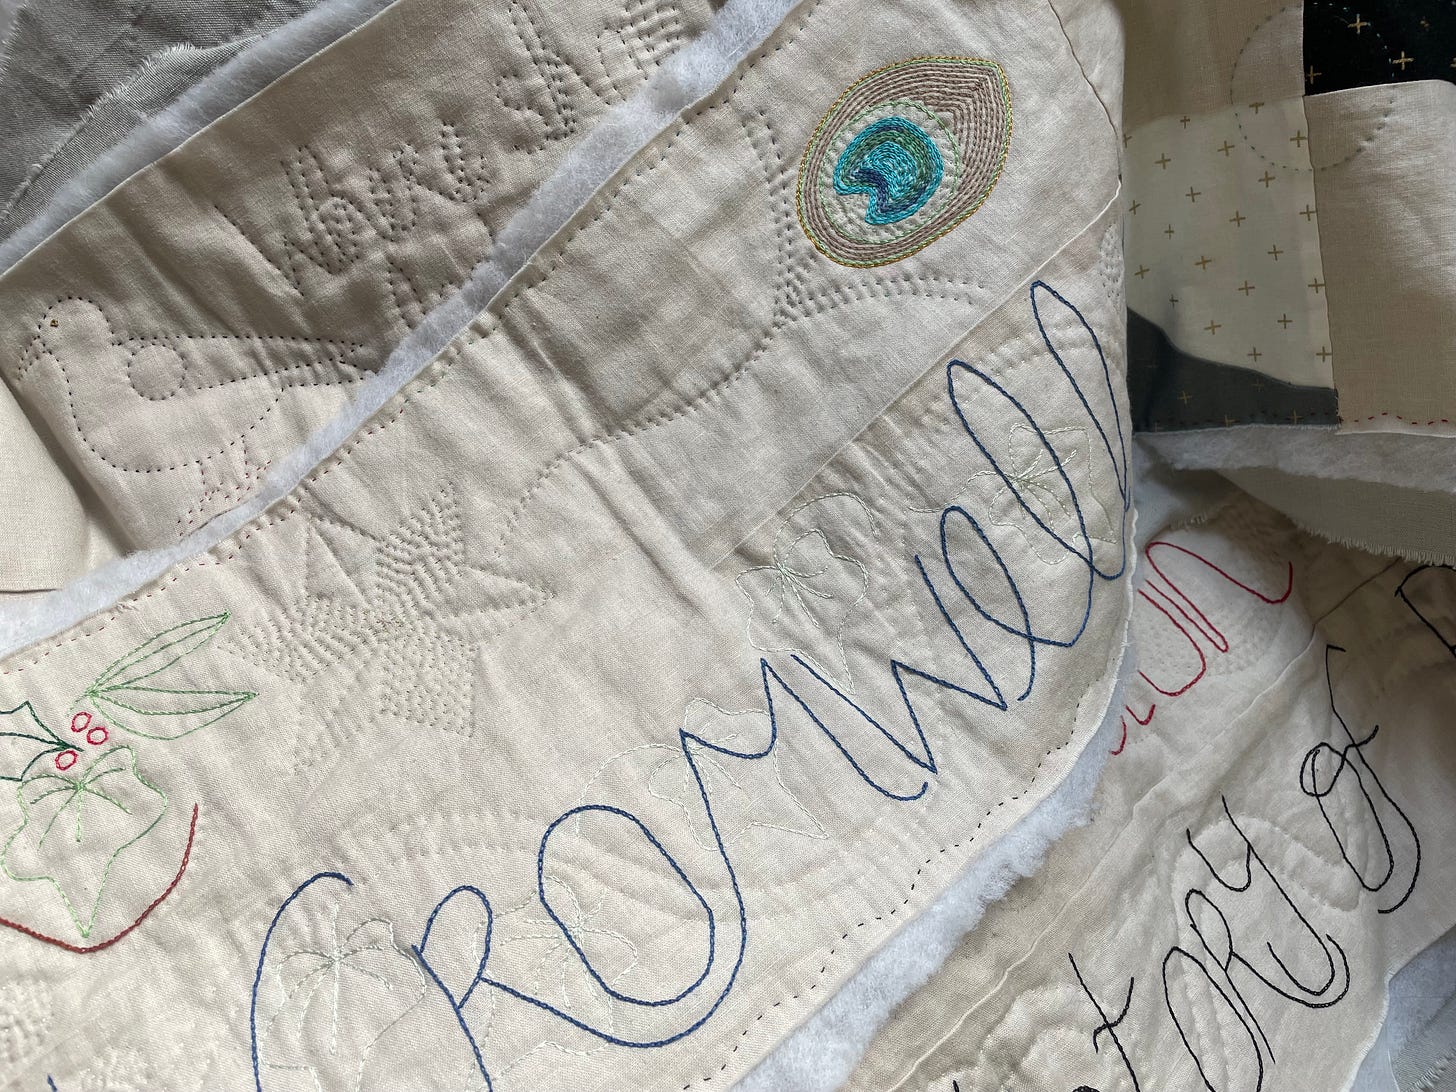 Strips of quilting showing lettering and images of peacock feathers, birds, leaves, star. The word “Cromwell” is visible.